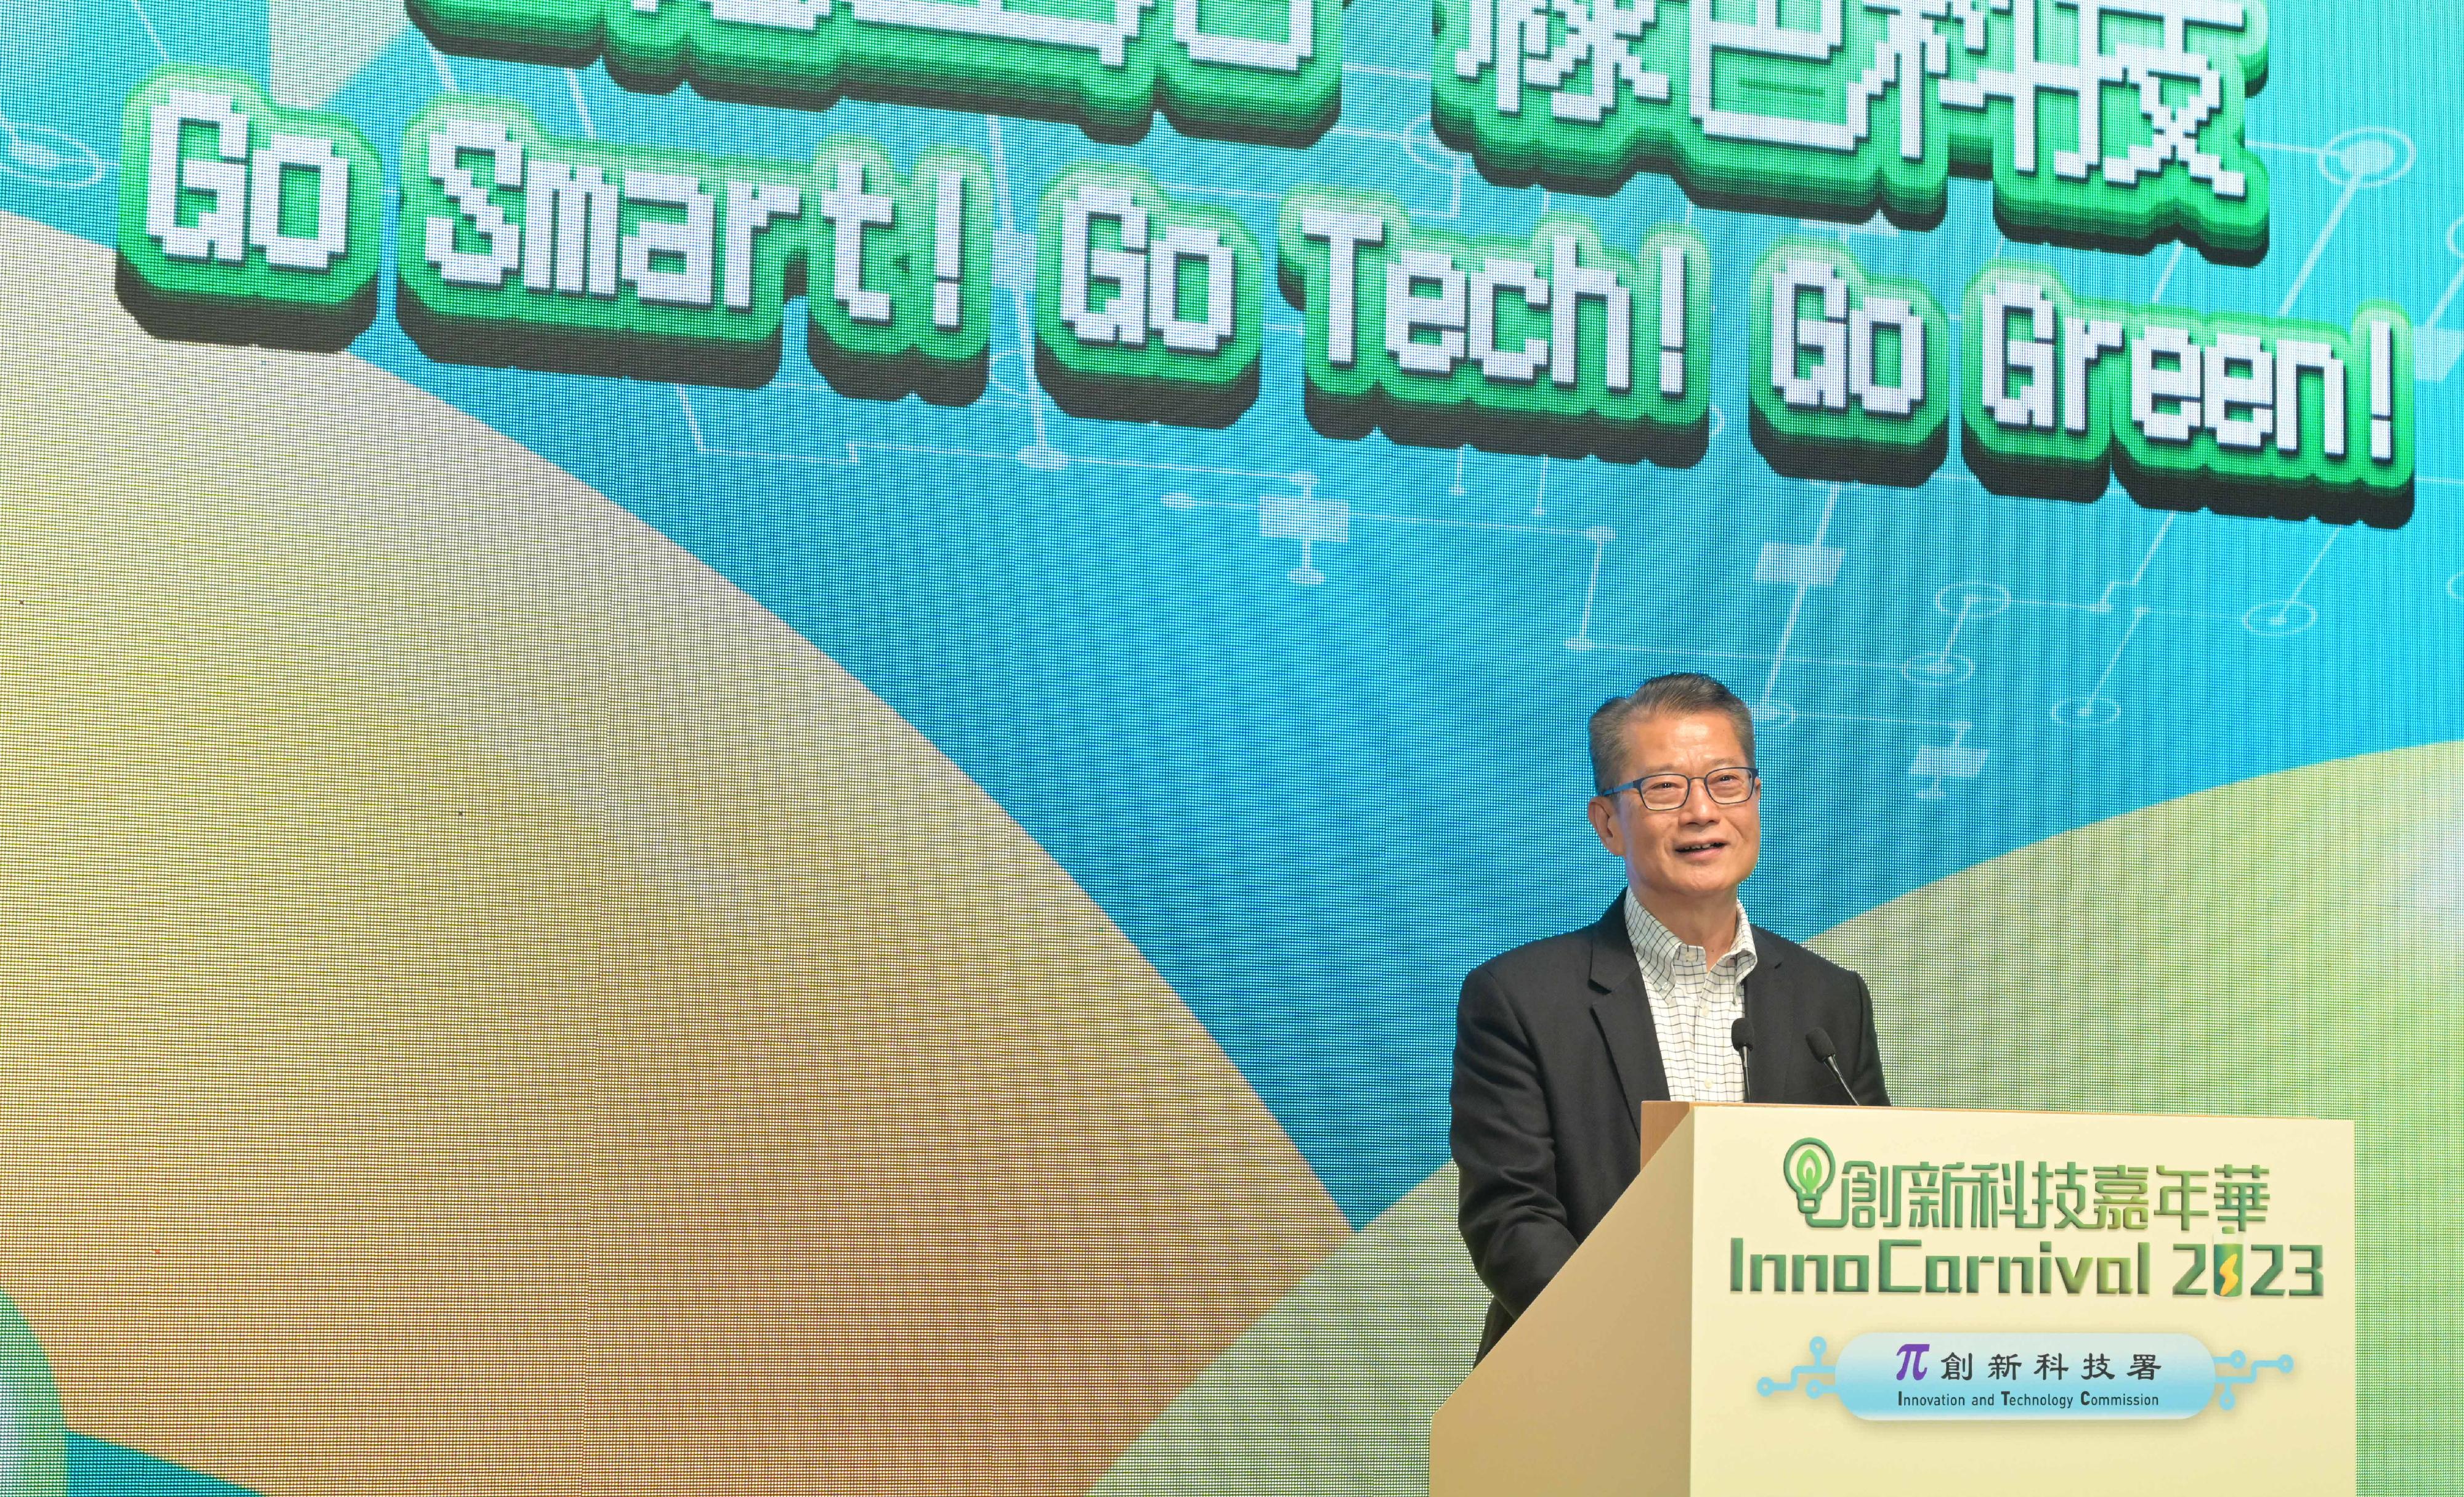 The Financial Secretary, Mr Paul Chan, speaks at the opening ceremony of InnoCarnival 2023 today (October 28).